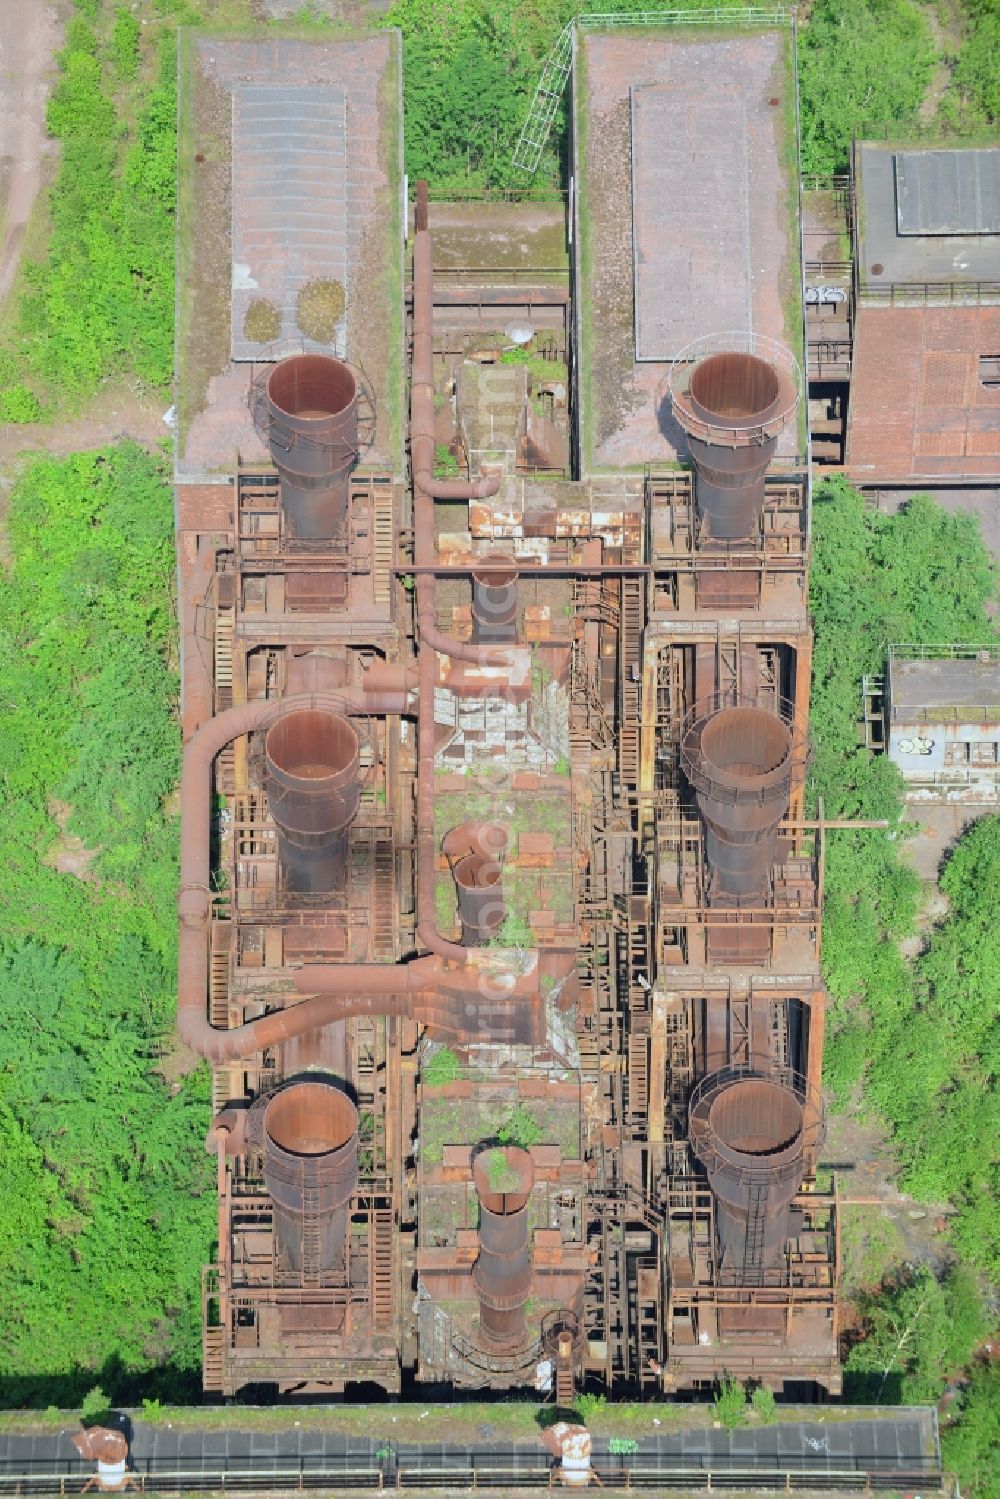 Duisburg from the bird's eye view: The sintering plant in Beeck, a part of the district of Meiderich/Beeck in Duisburg in the Ruhr region in the state of North Rhine-Westphalia. The complex was operating until 1995 and last owned by Thyssen. Close-by is the Landscape Park Duisburg-North and the factory is one of a series of vacant and disused historical industrial buildings in the area